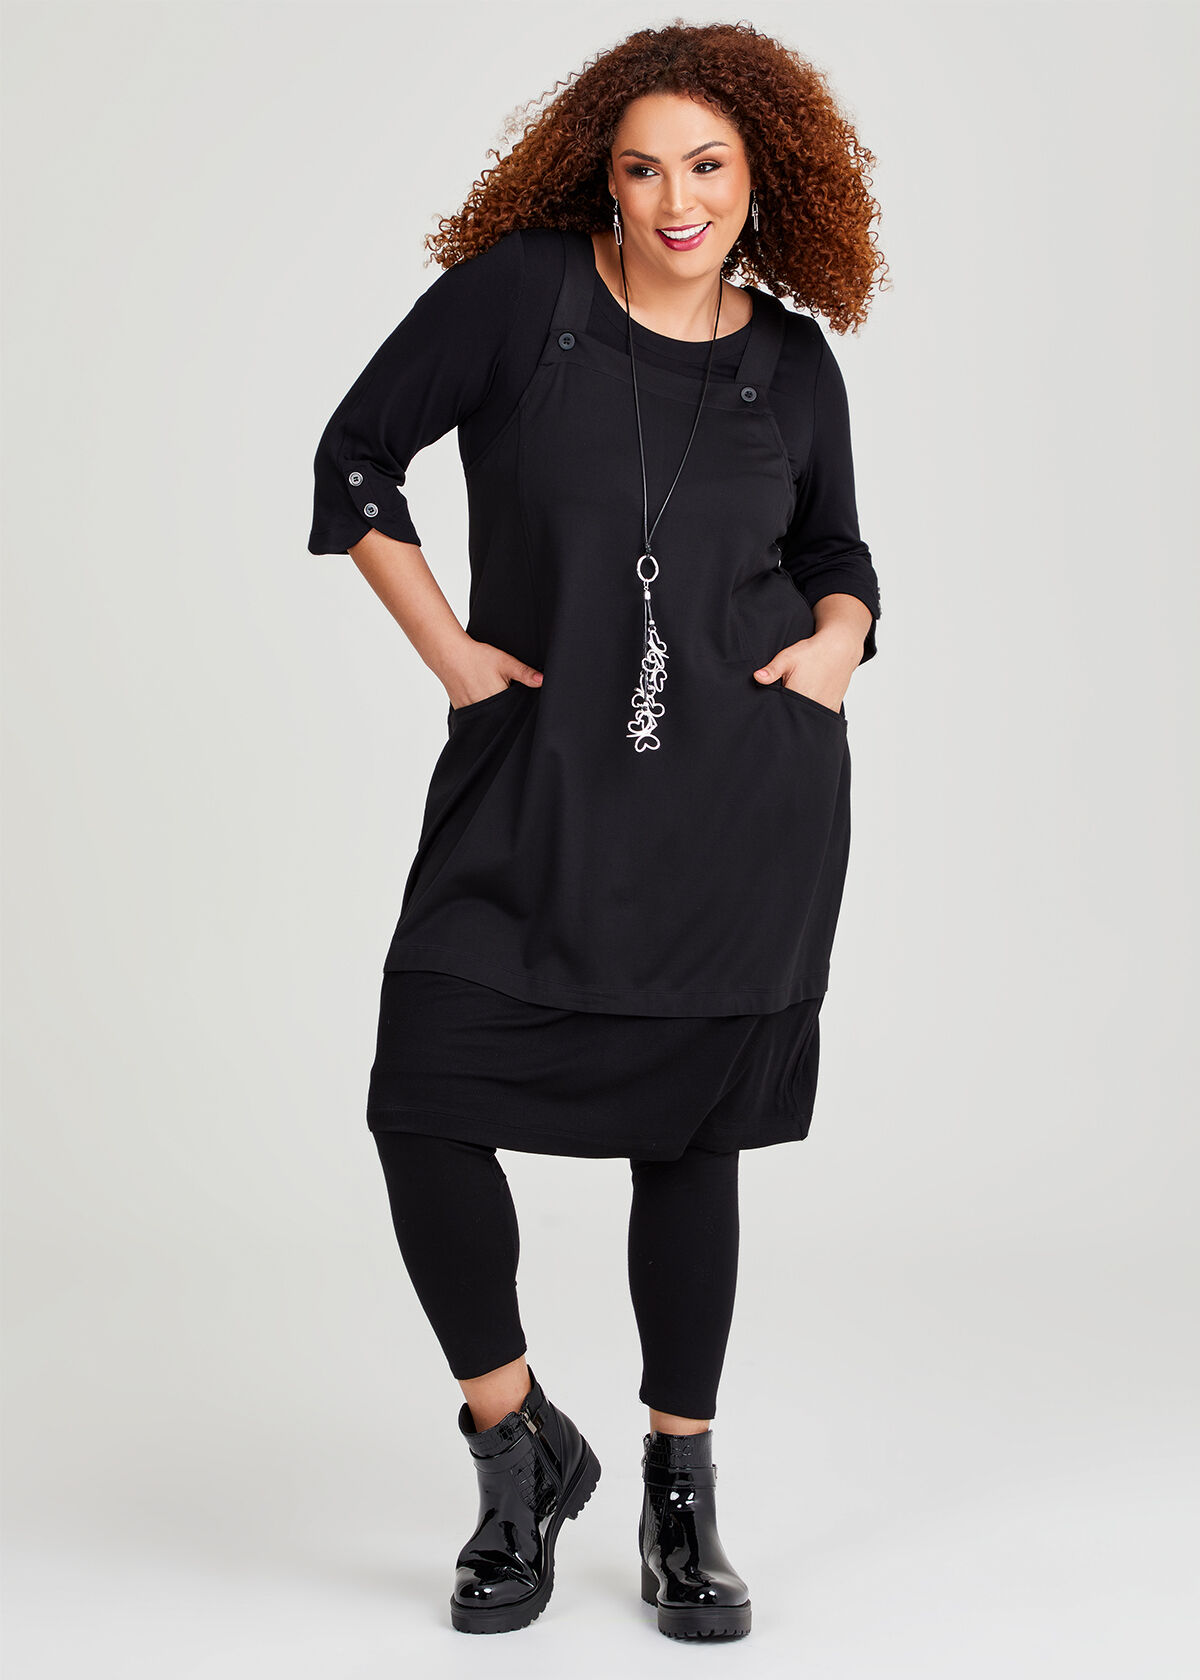 Women's Tunic Tops, Solid Colar Bat Long Slevee Oversized Loose T Shirts  Wear with Leggings Fall Sweaters Dressy Blouse Black at Amazon Women's  Clothing store